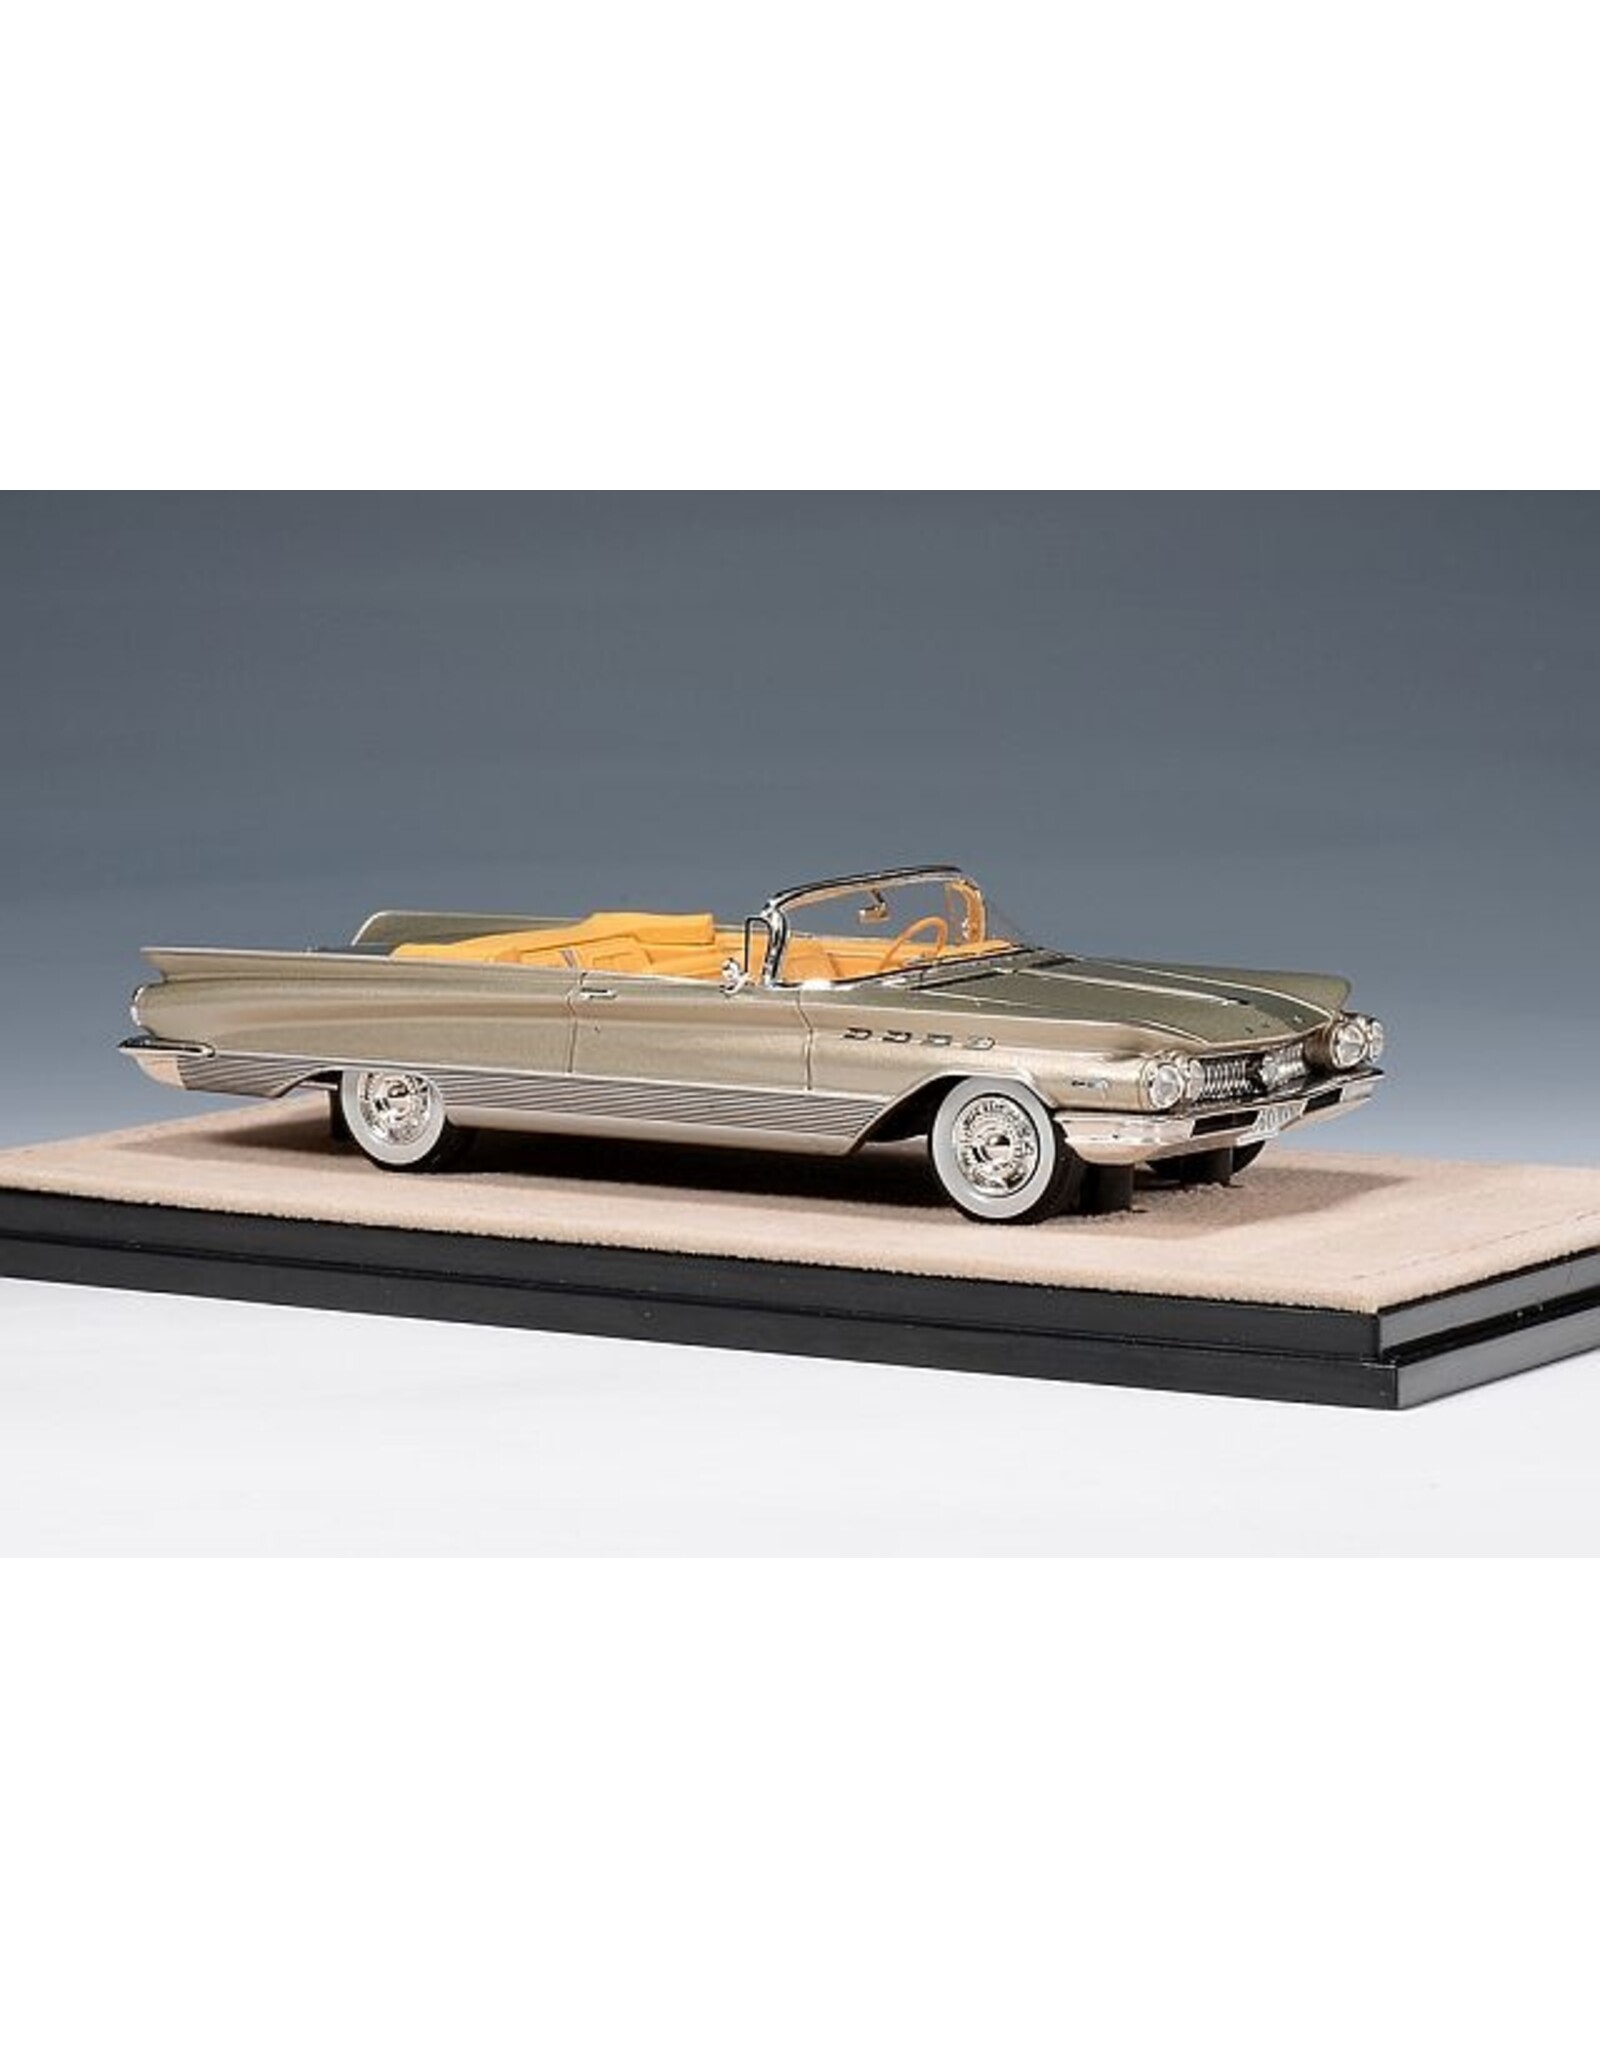 Buick Buick Electra 225 Convertible(1960)open roof(Pearl Fawn metallic)